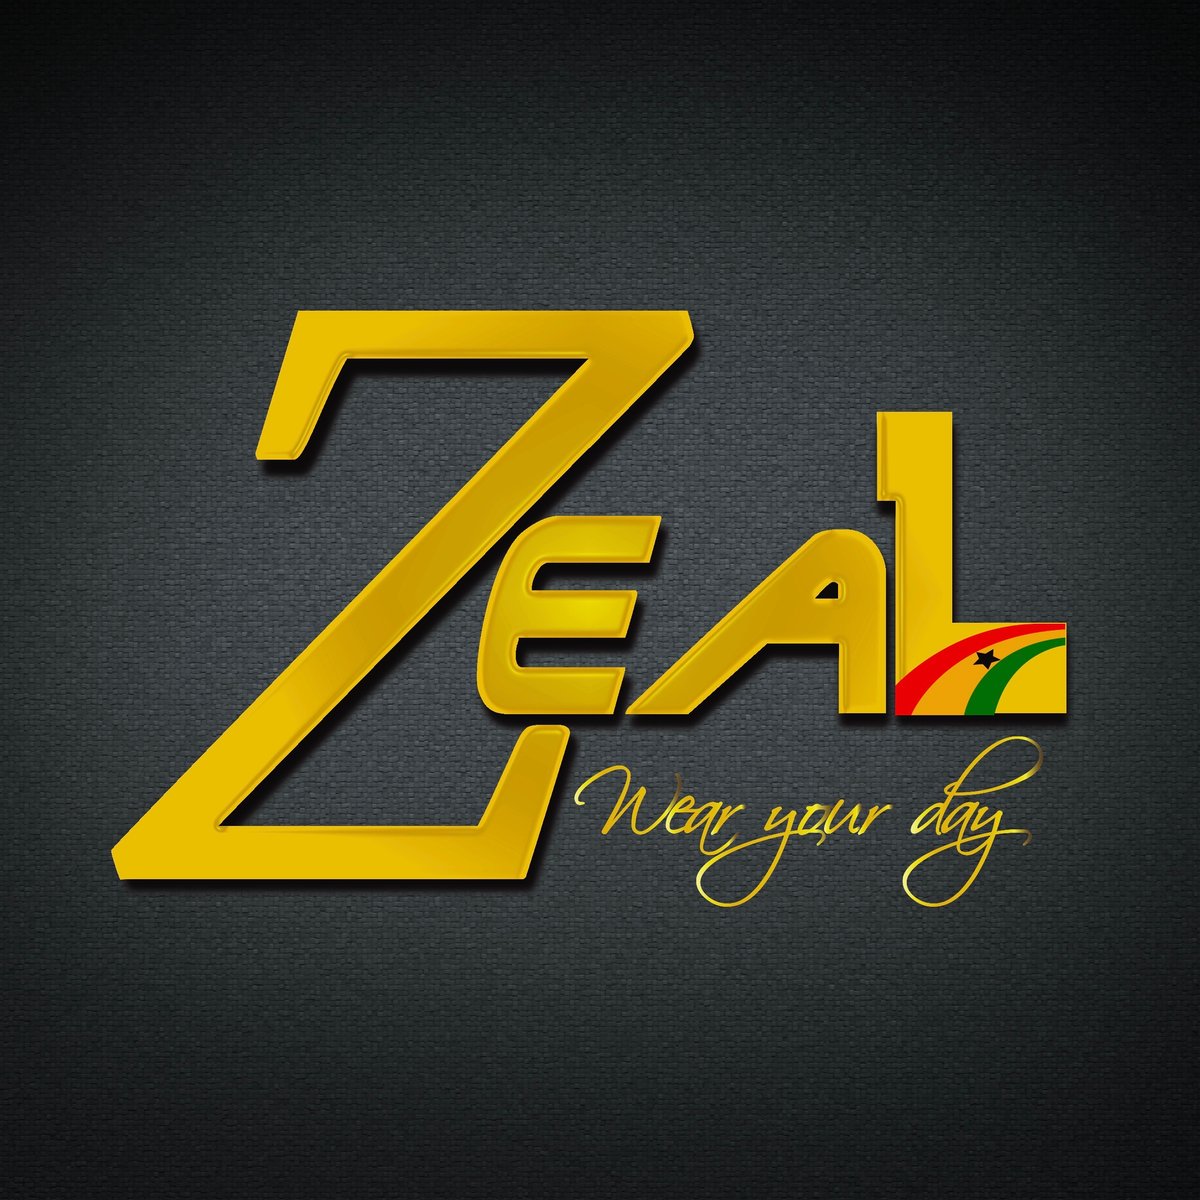 Image of ZEAL WEAR YOUR DAY NECKLACE - YAA (THURSDAY)